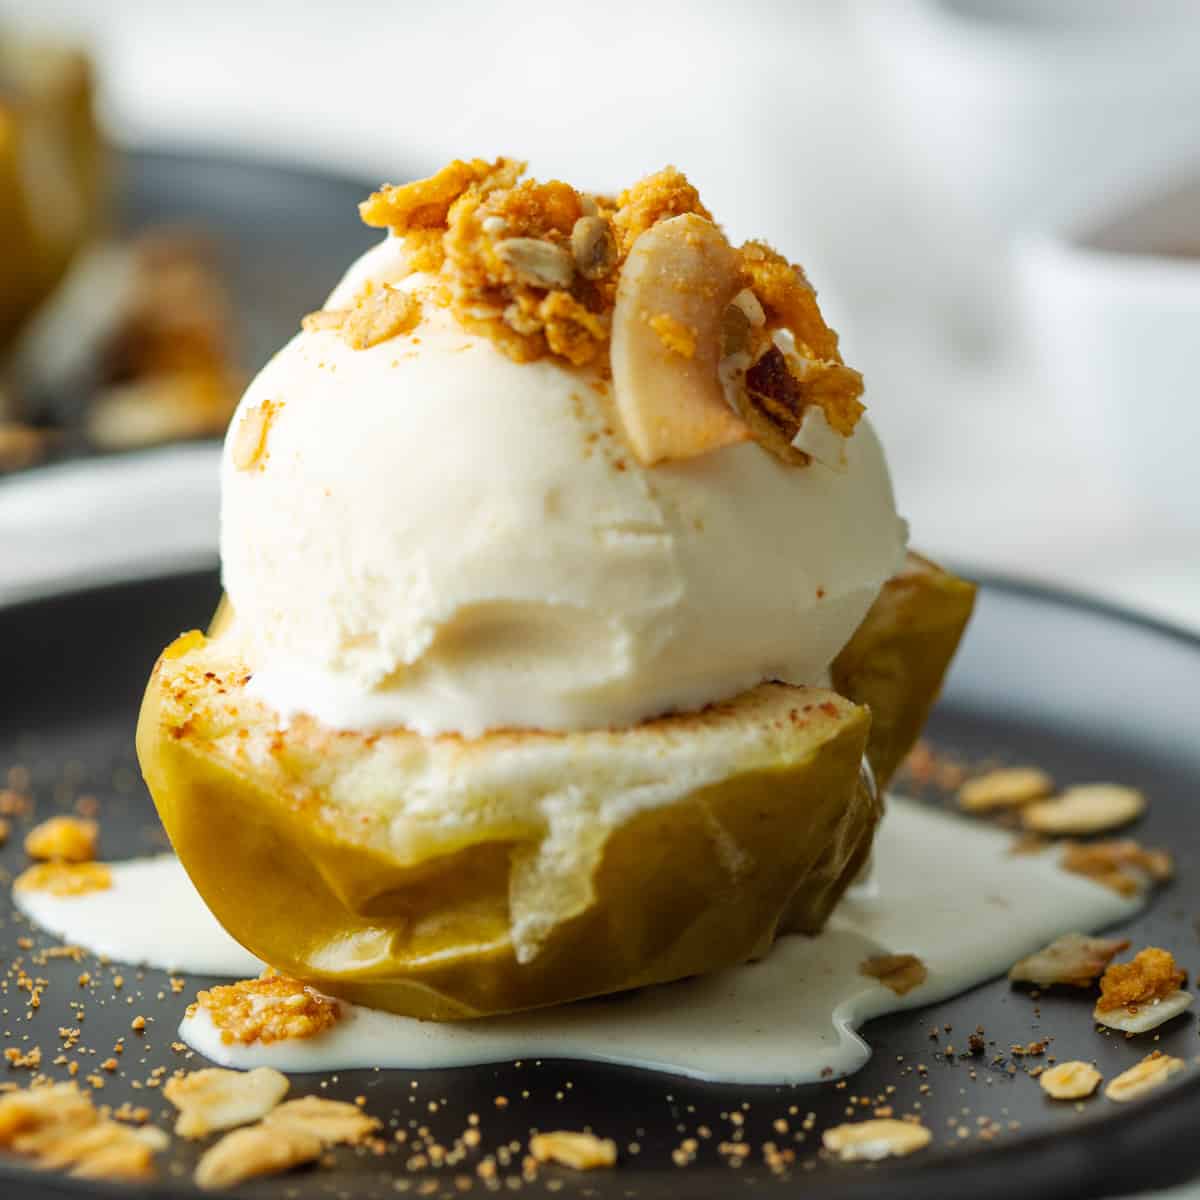 Baked apple half served with ice cream and granola.
